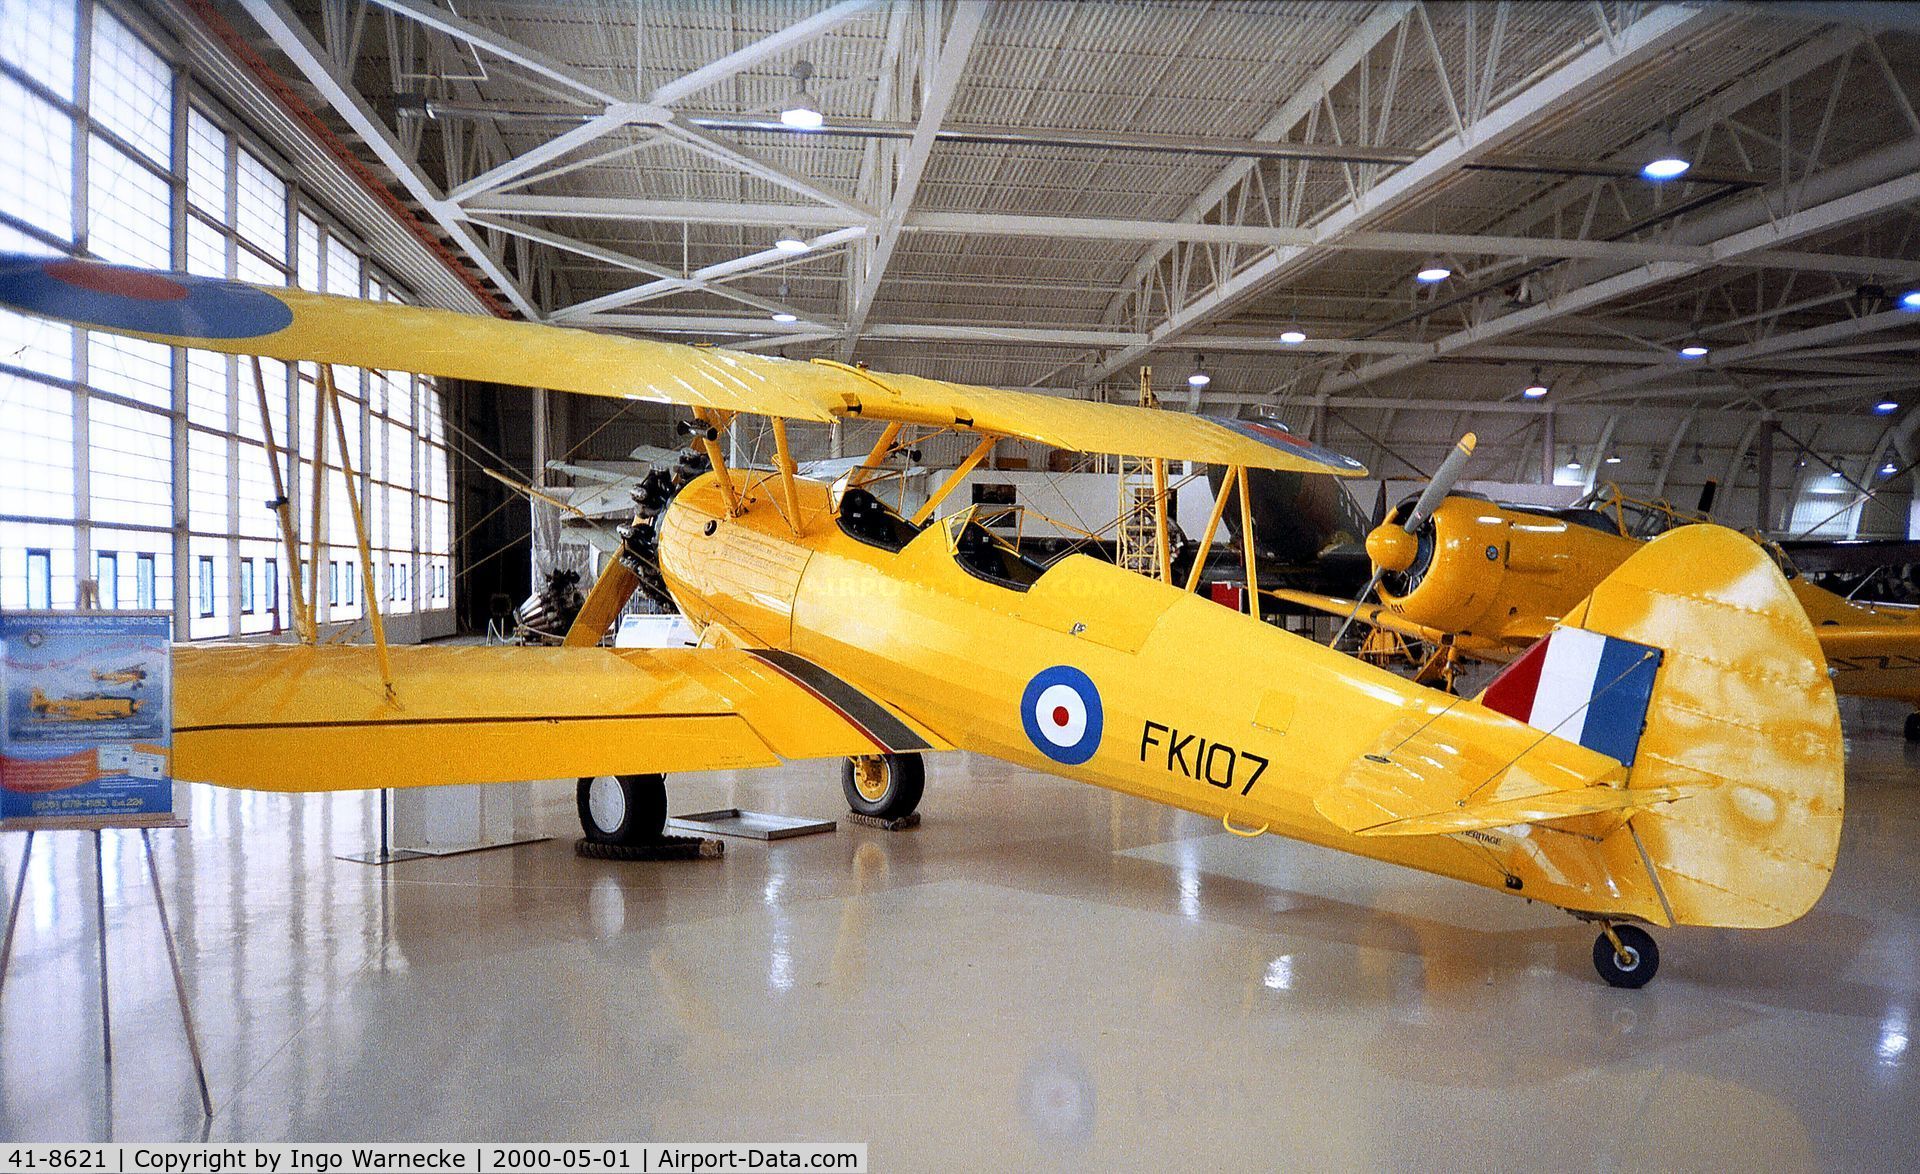 41-8621, Boeing PT-17 Kaydet (A75N1) C/N 75-2180, Stearman PT-17 (shown here in the markings of FK107 of the RCAF) at the Canadian Warplane Heritage Museum, Hamilton Ontario